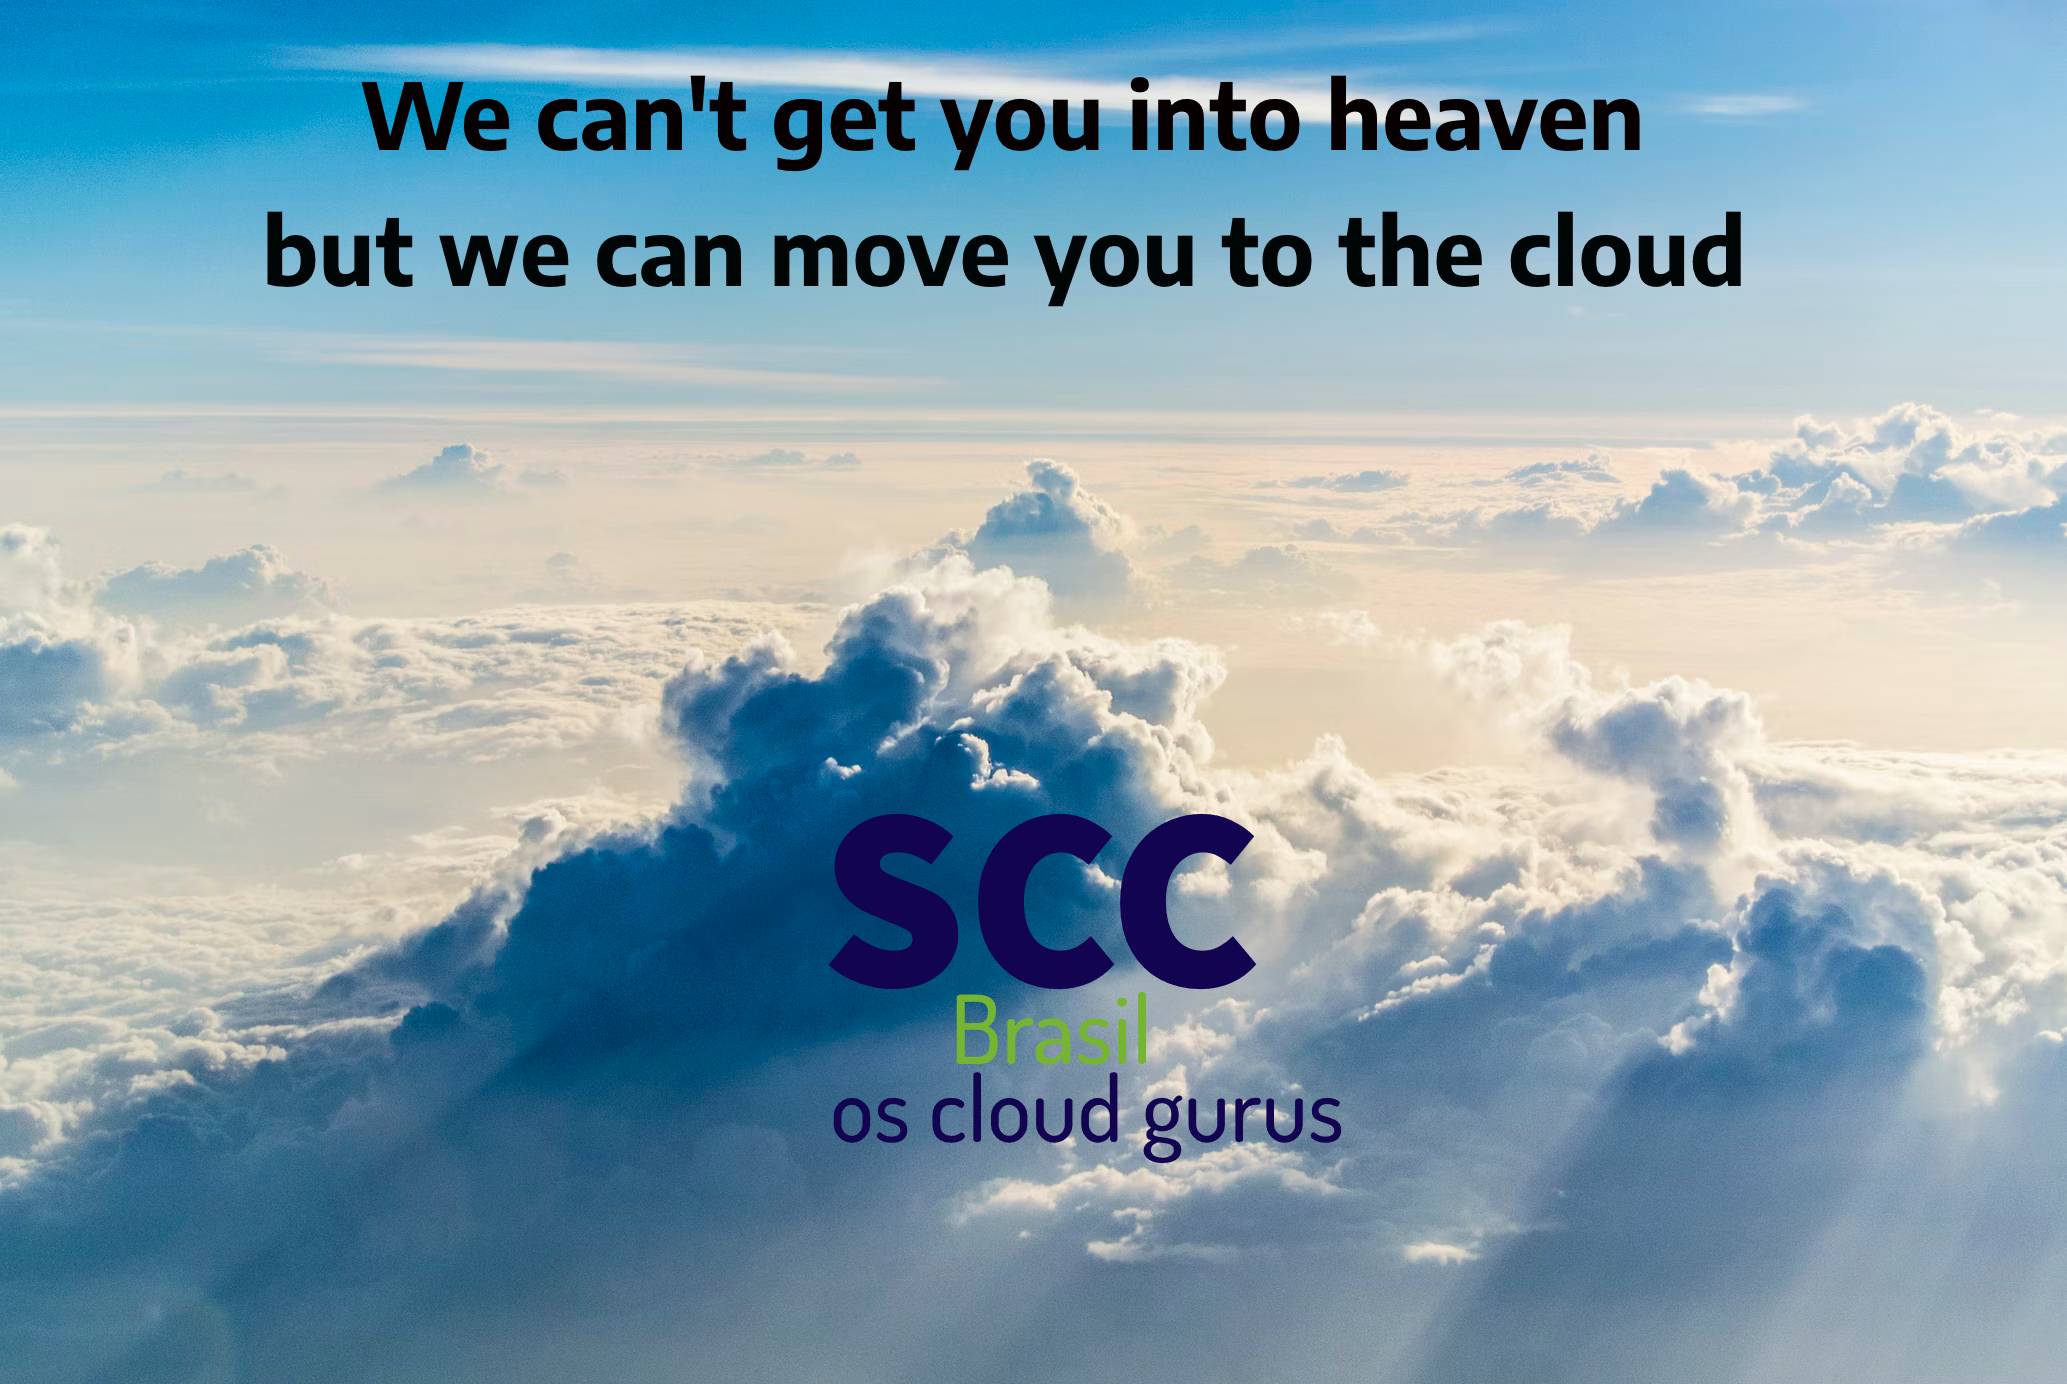 Ready for the cloud?